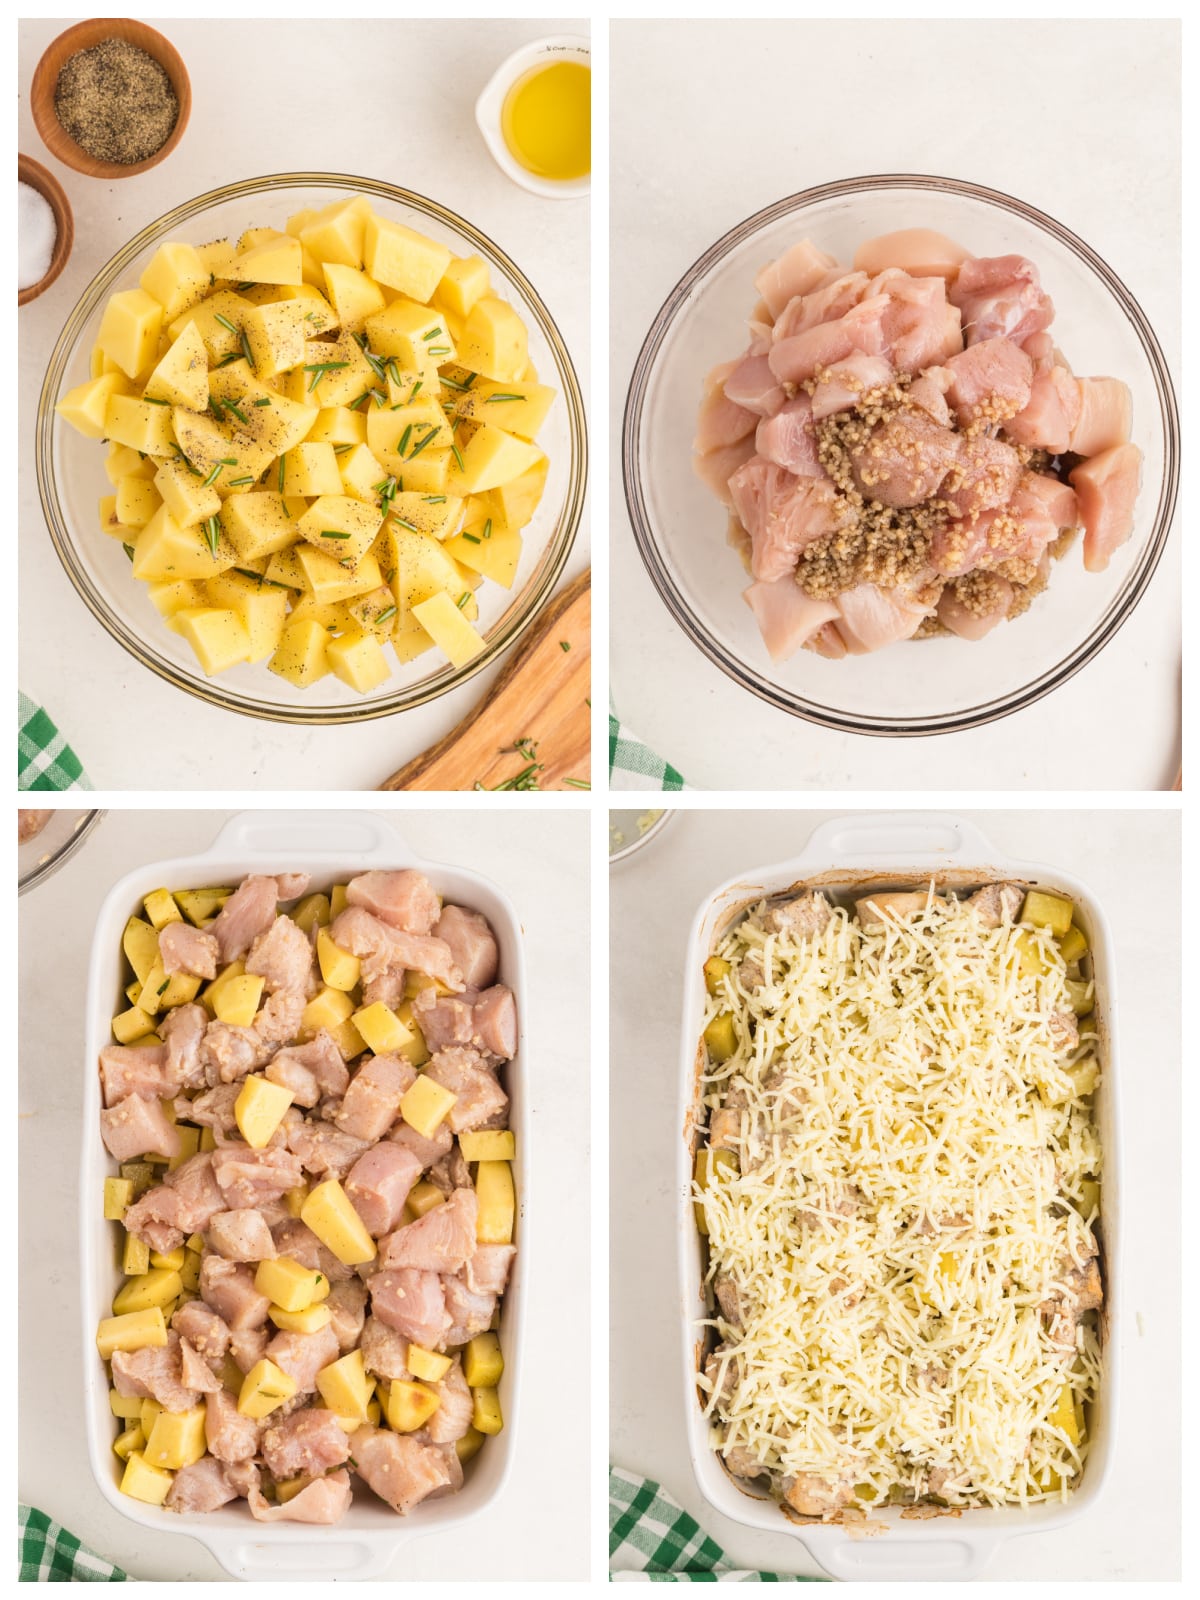 Images showing chicken potato casserole instructions.